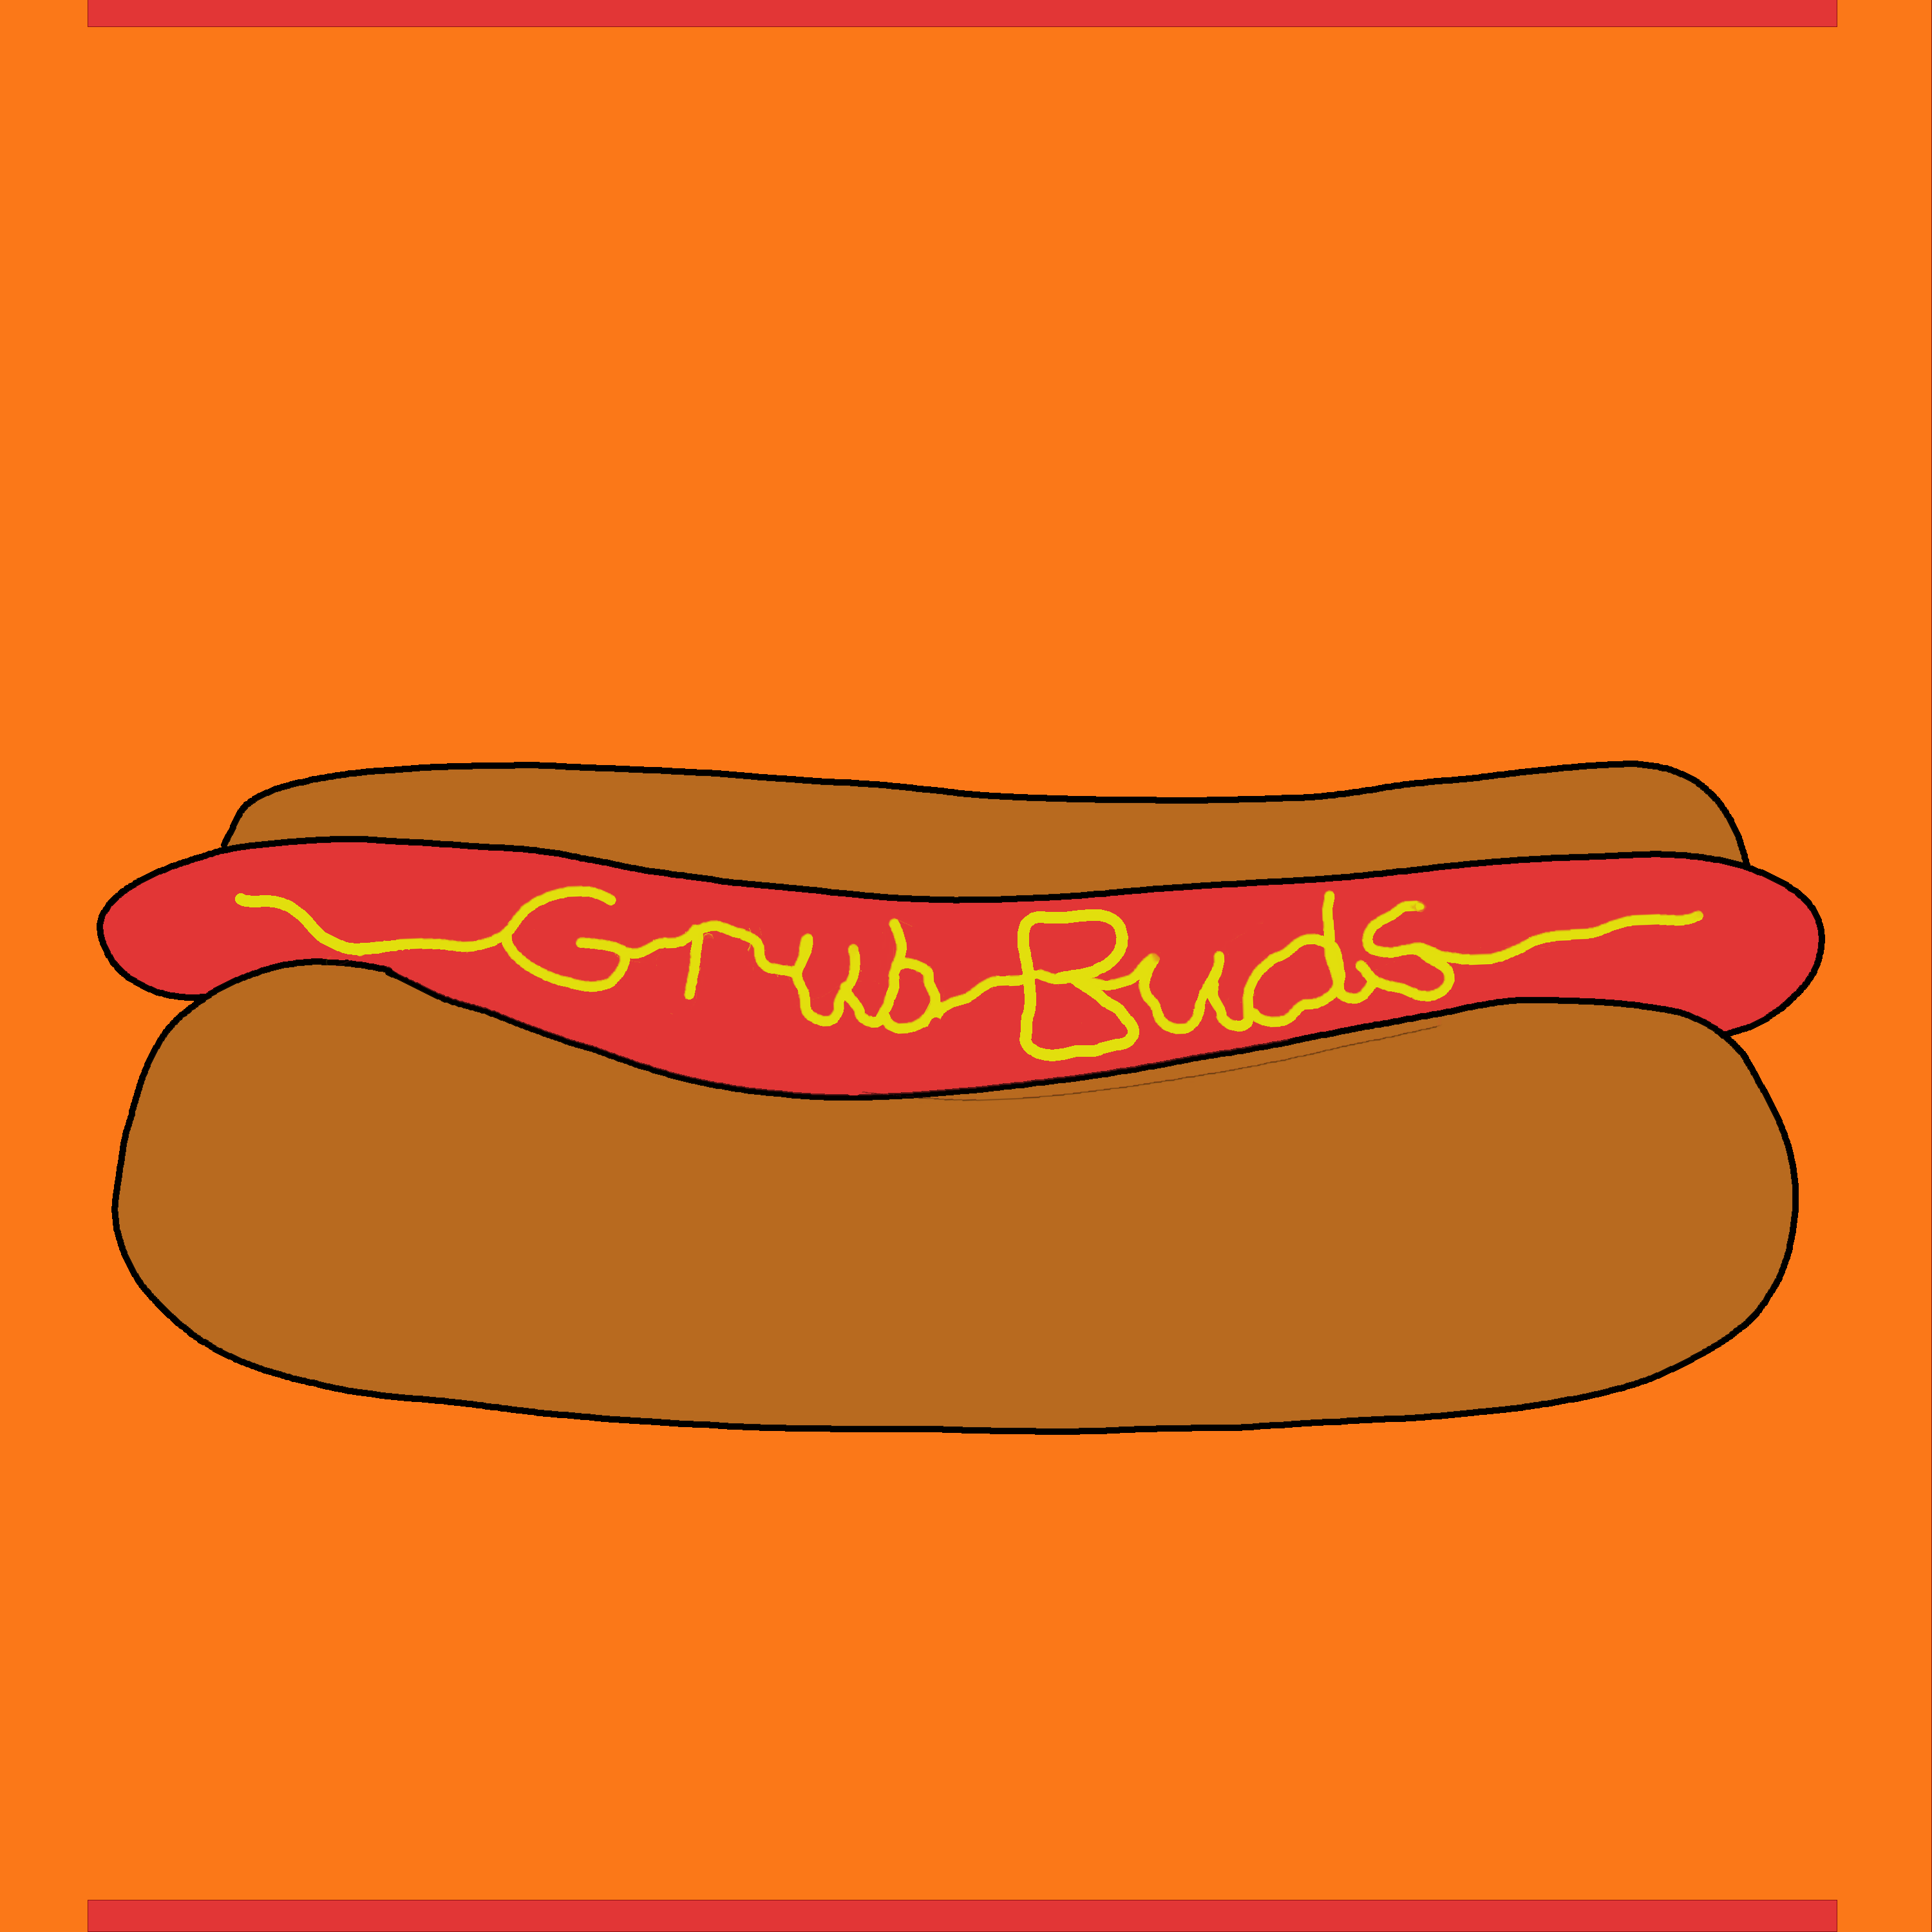 Four Guys Eating Weiners For Pride! - Grub Buds #131